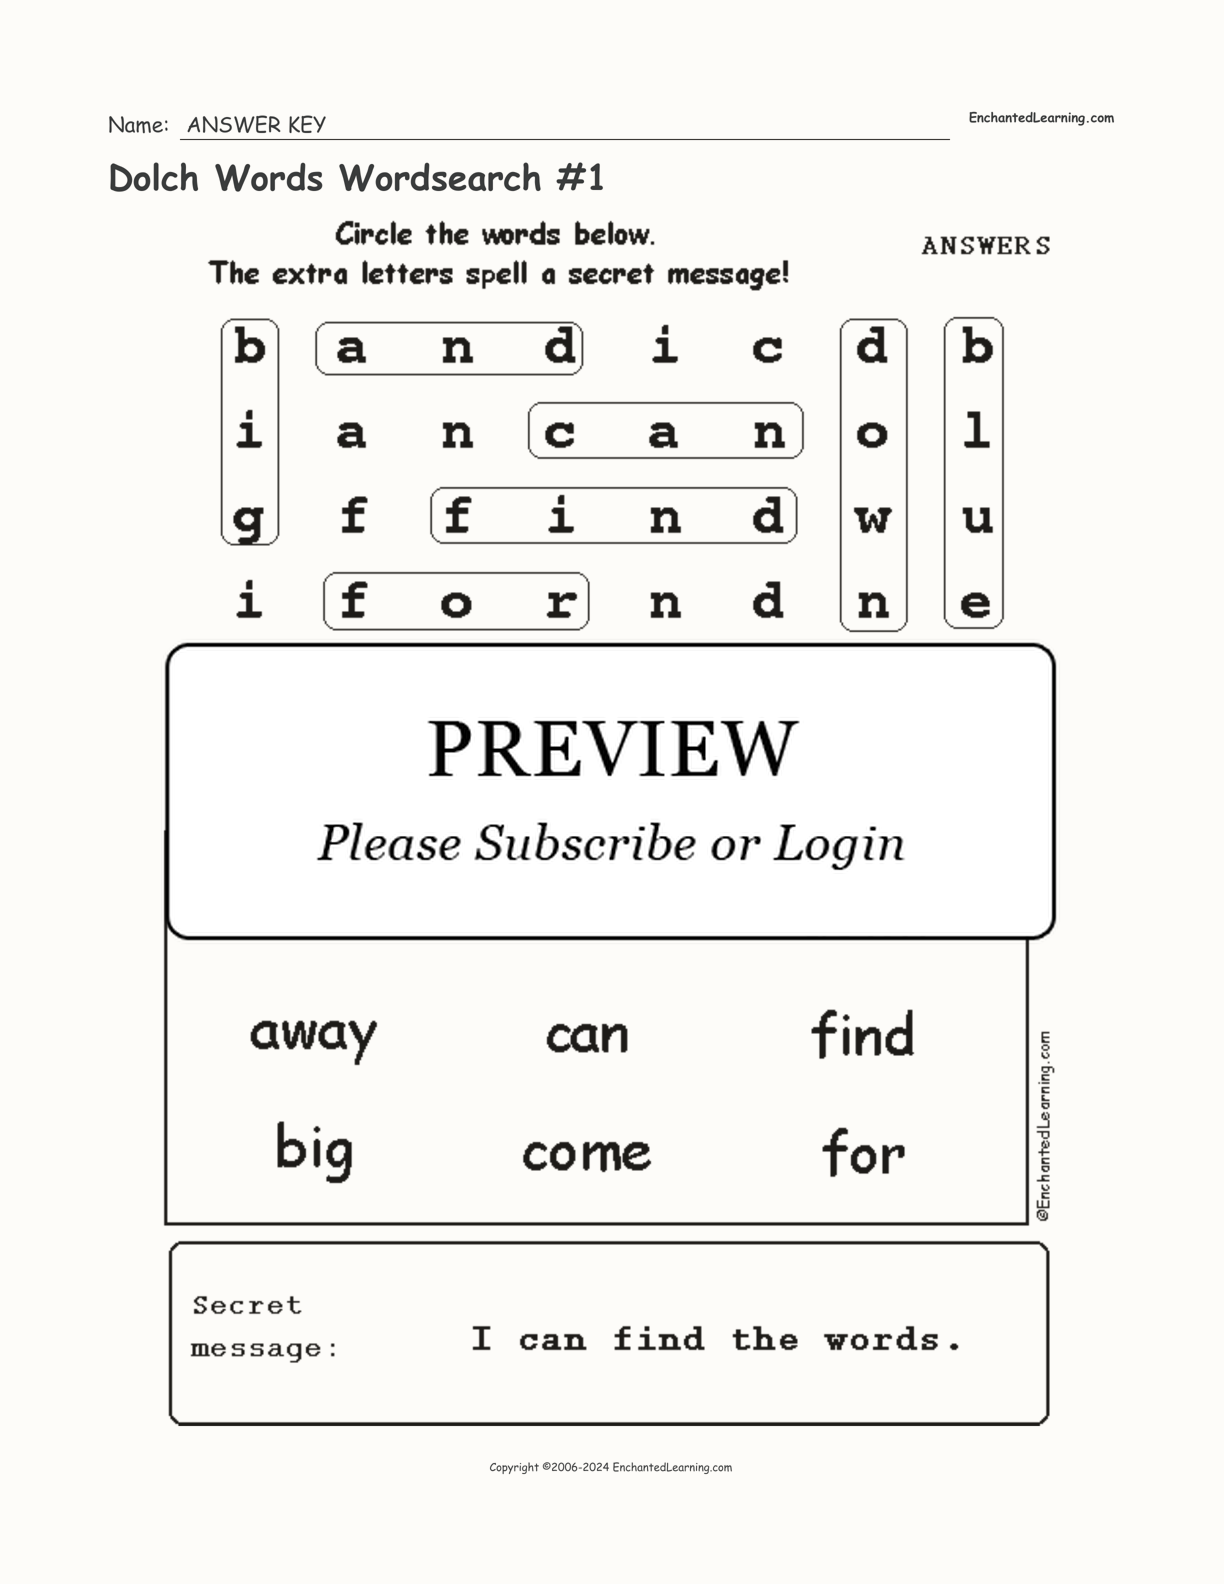 Dolch Words Wordsearch #1 interactive worksheet page 2